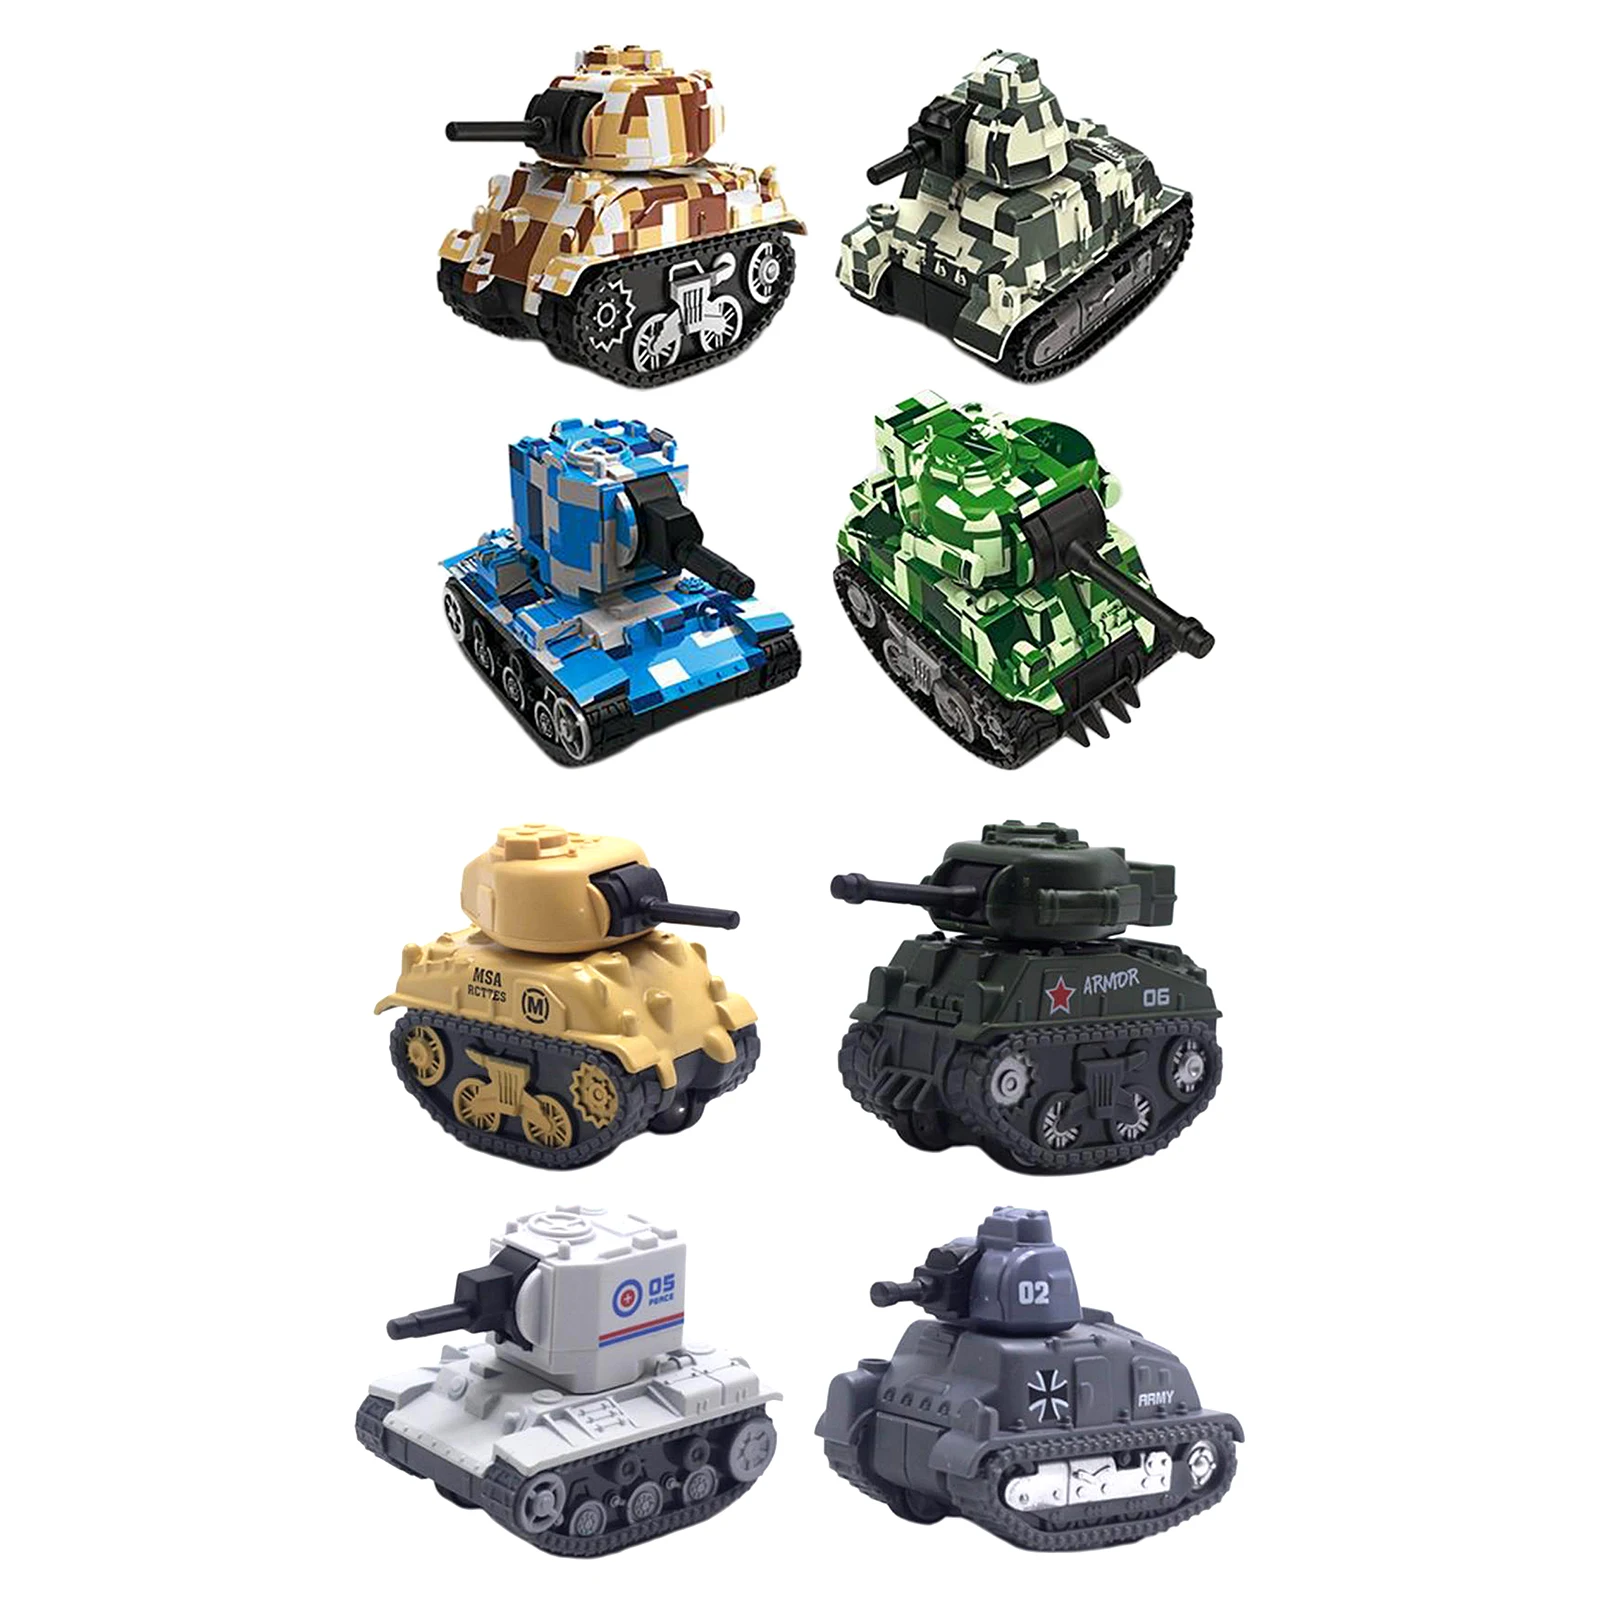 4-pack Simulation Tank Toys Kids Educational Toy for Commemorate Collection Kid Adult Gifts